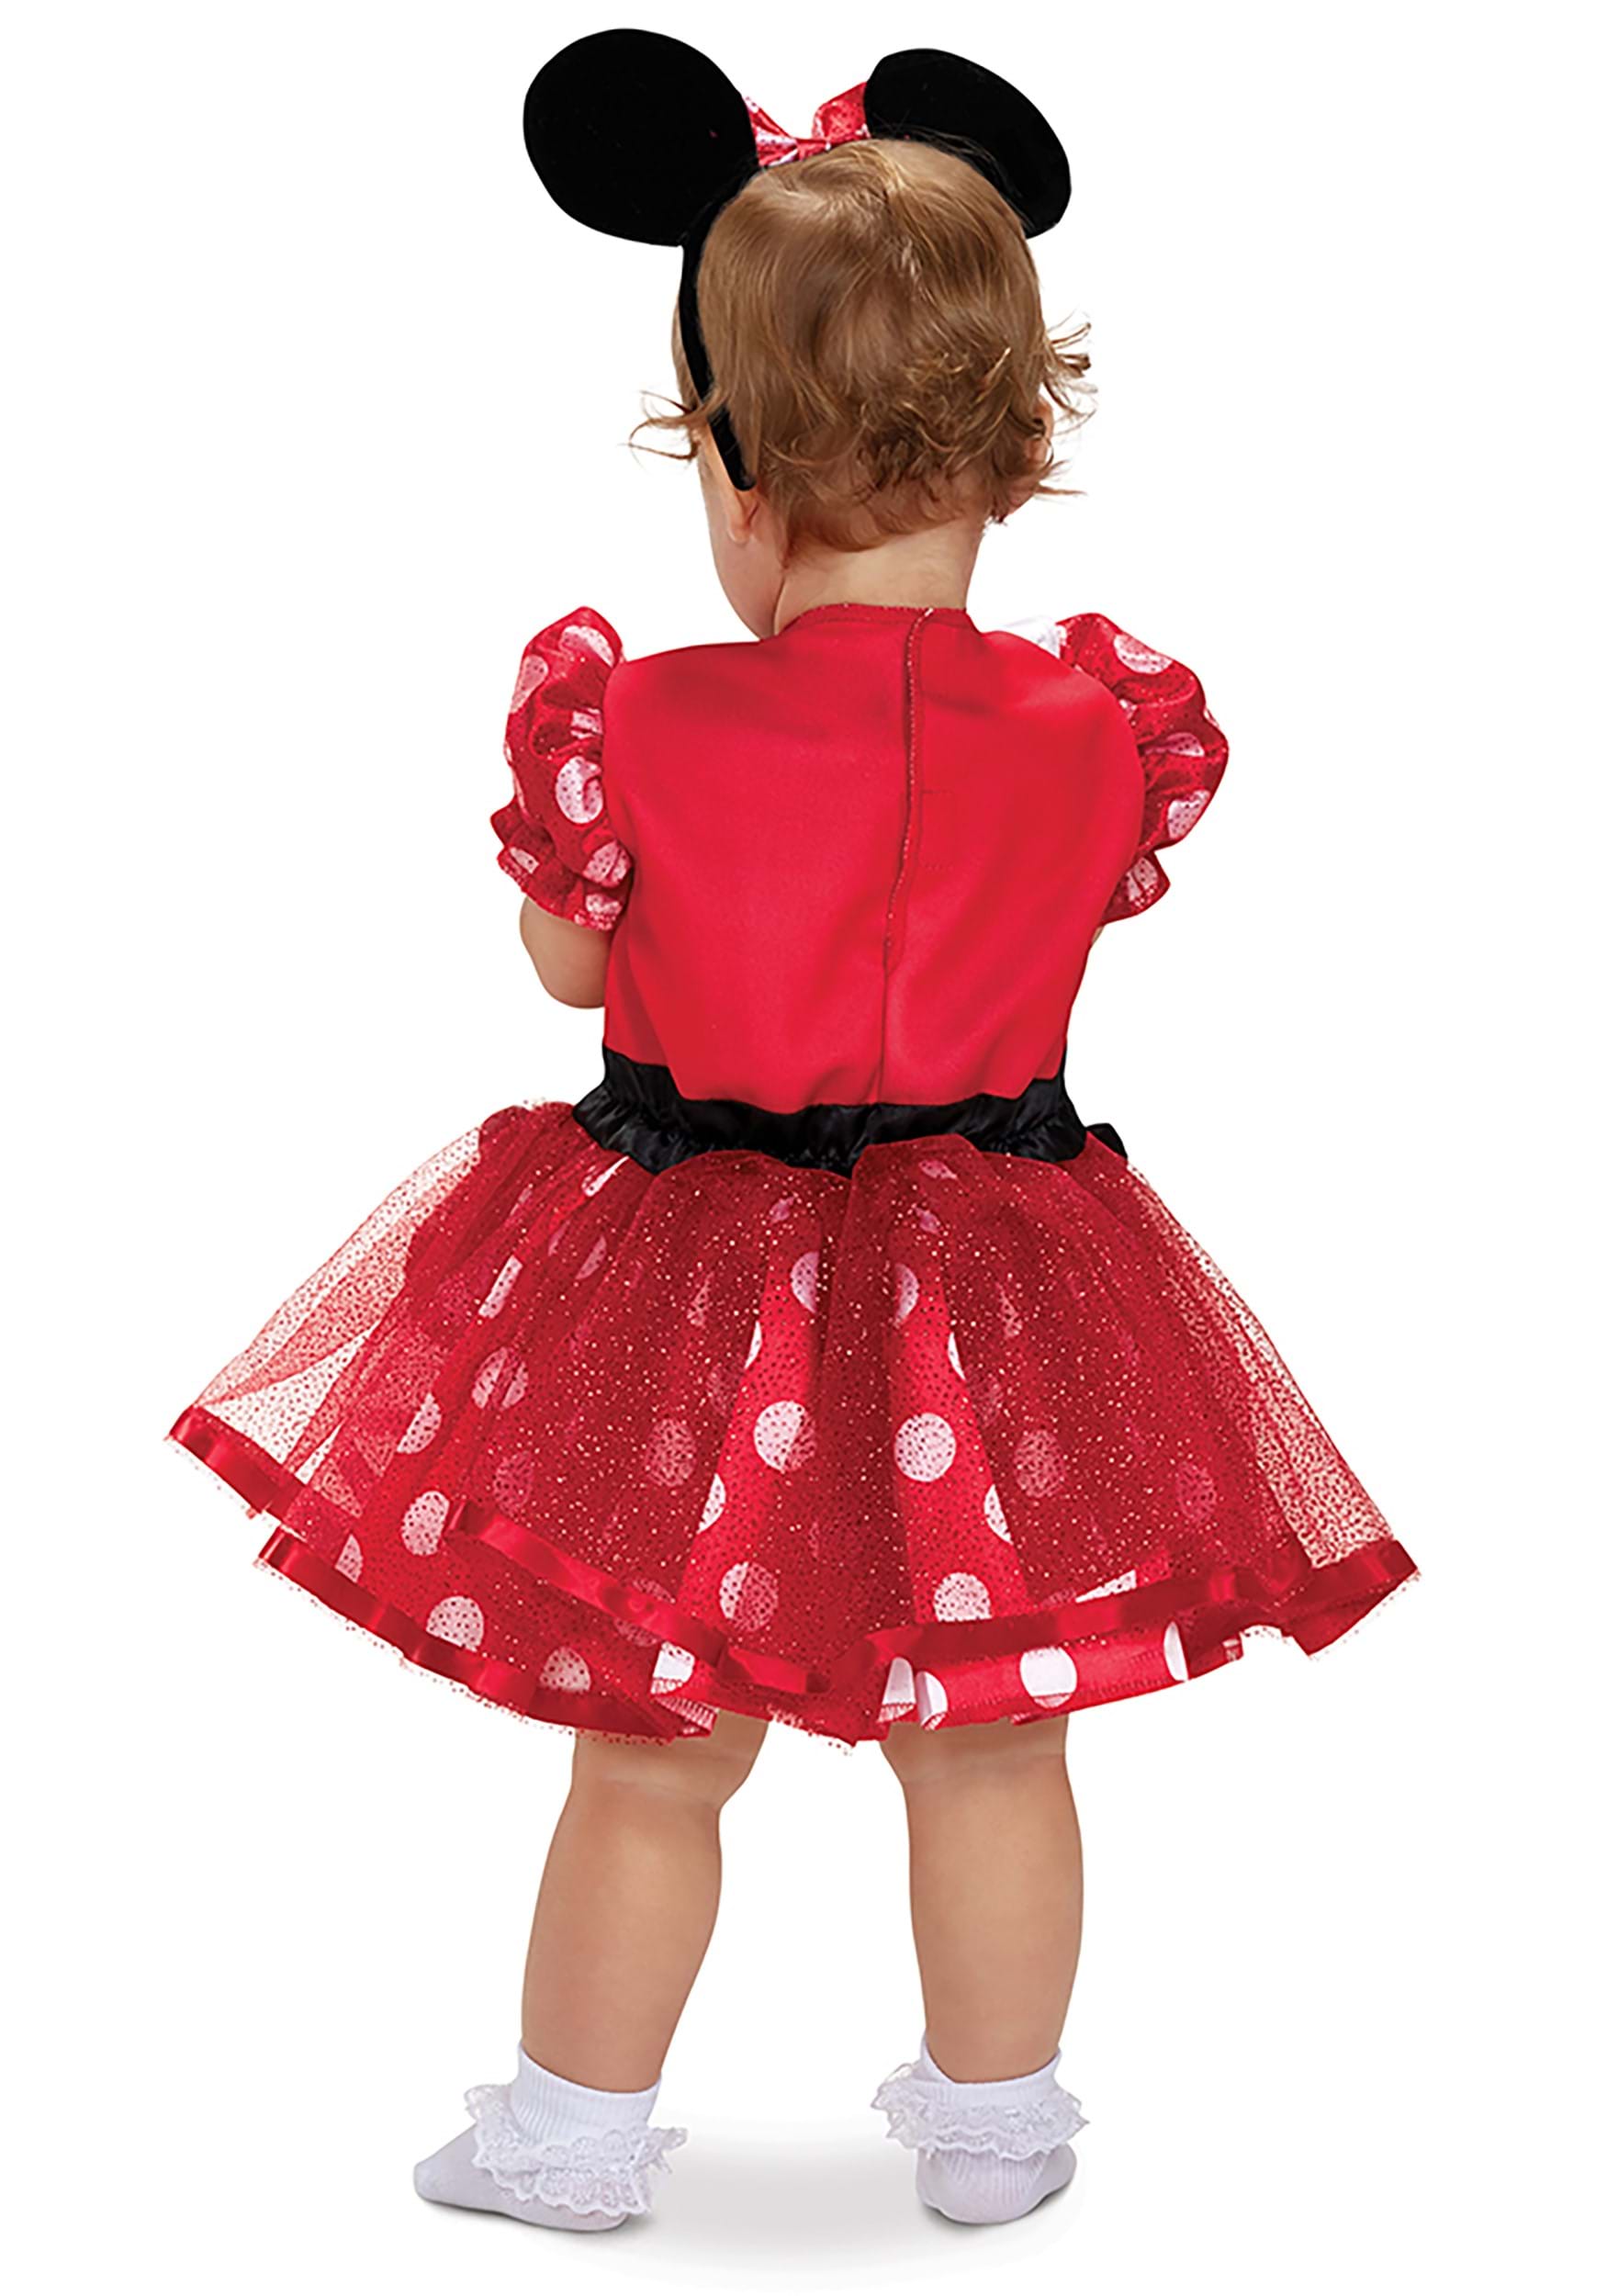 The Little Things We Do  Minnie mouse halloween costume, Minnie mouse  costume toddler, Minnie mouse costume